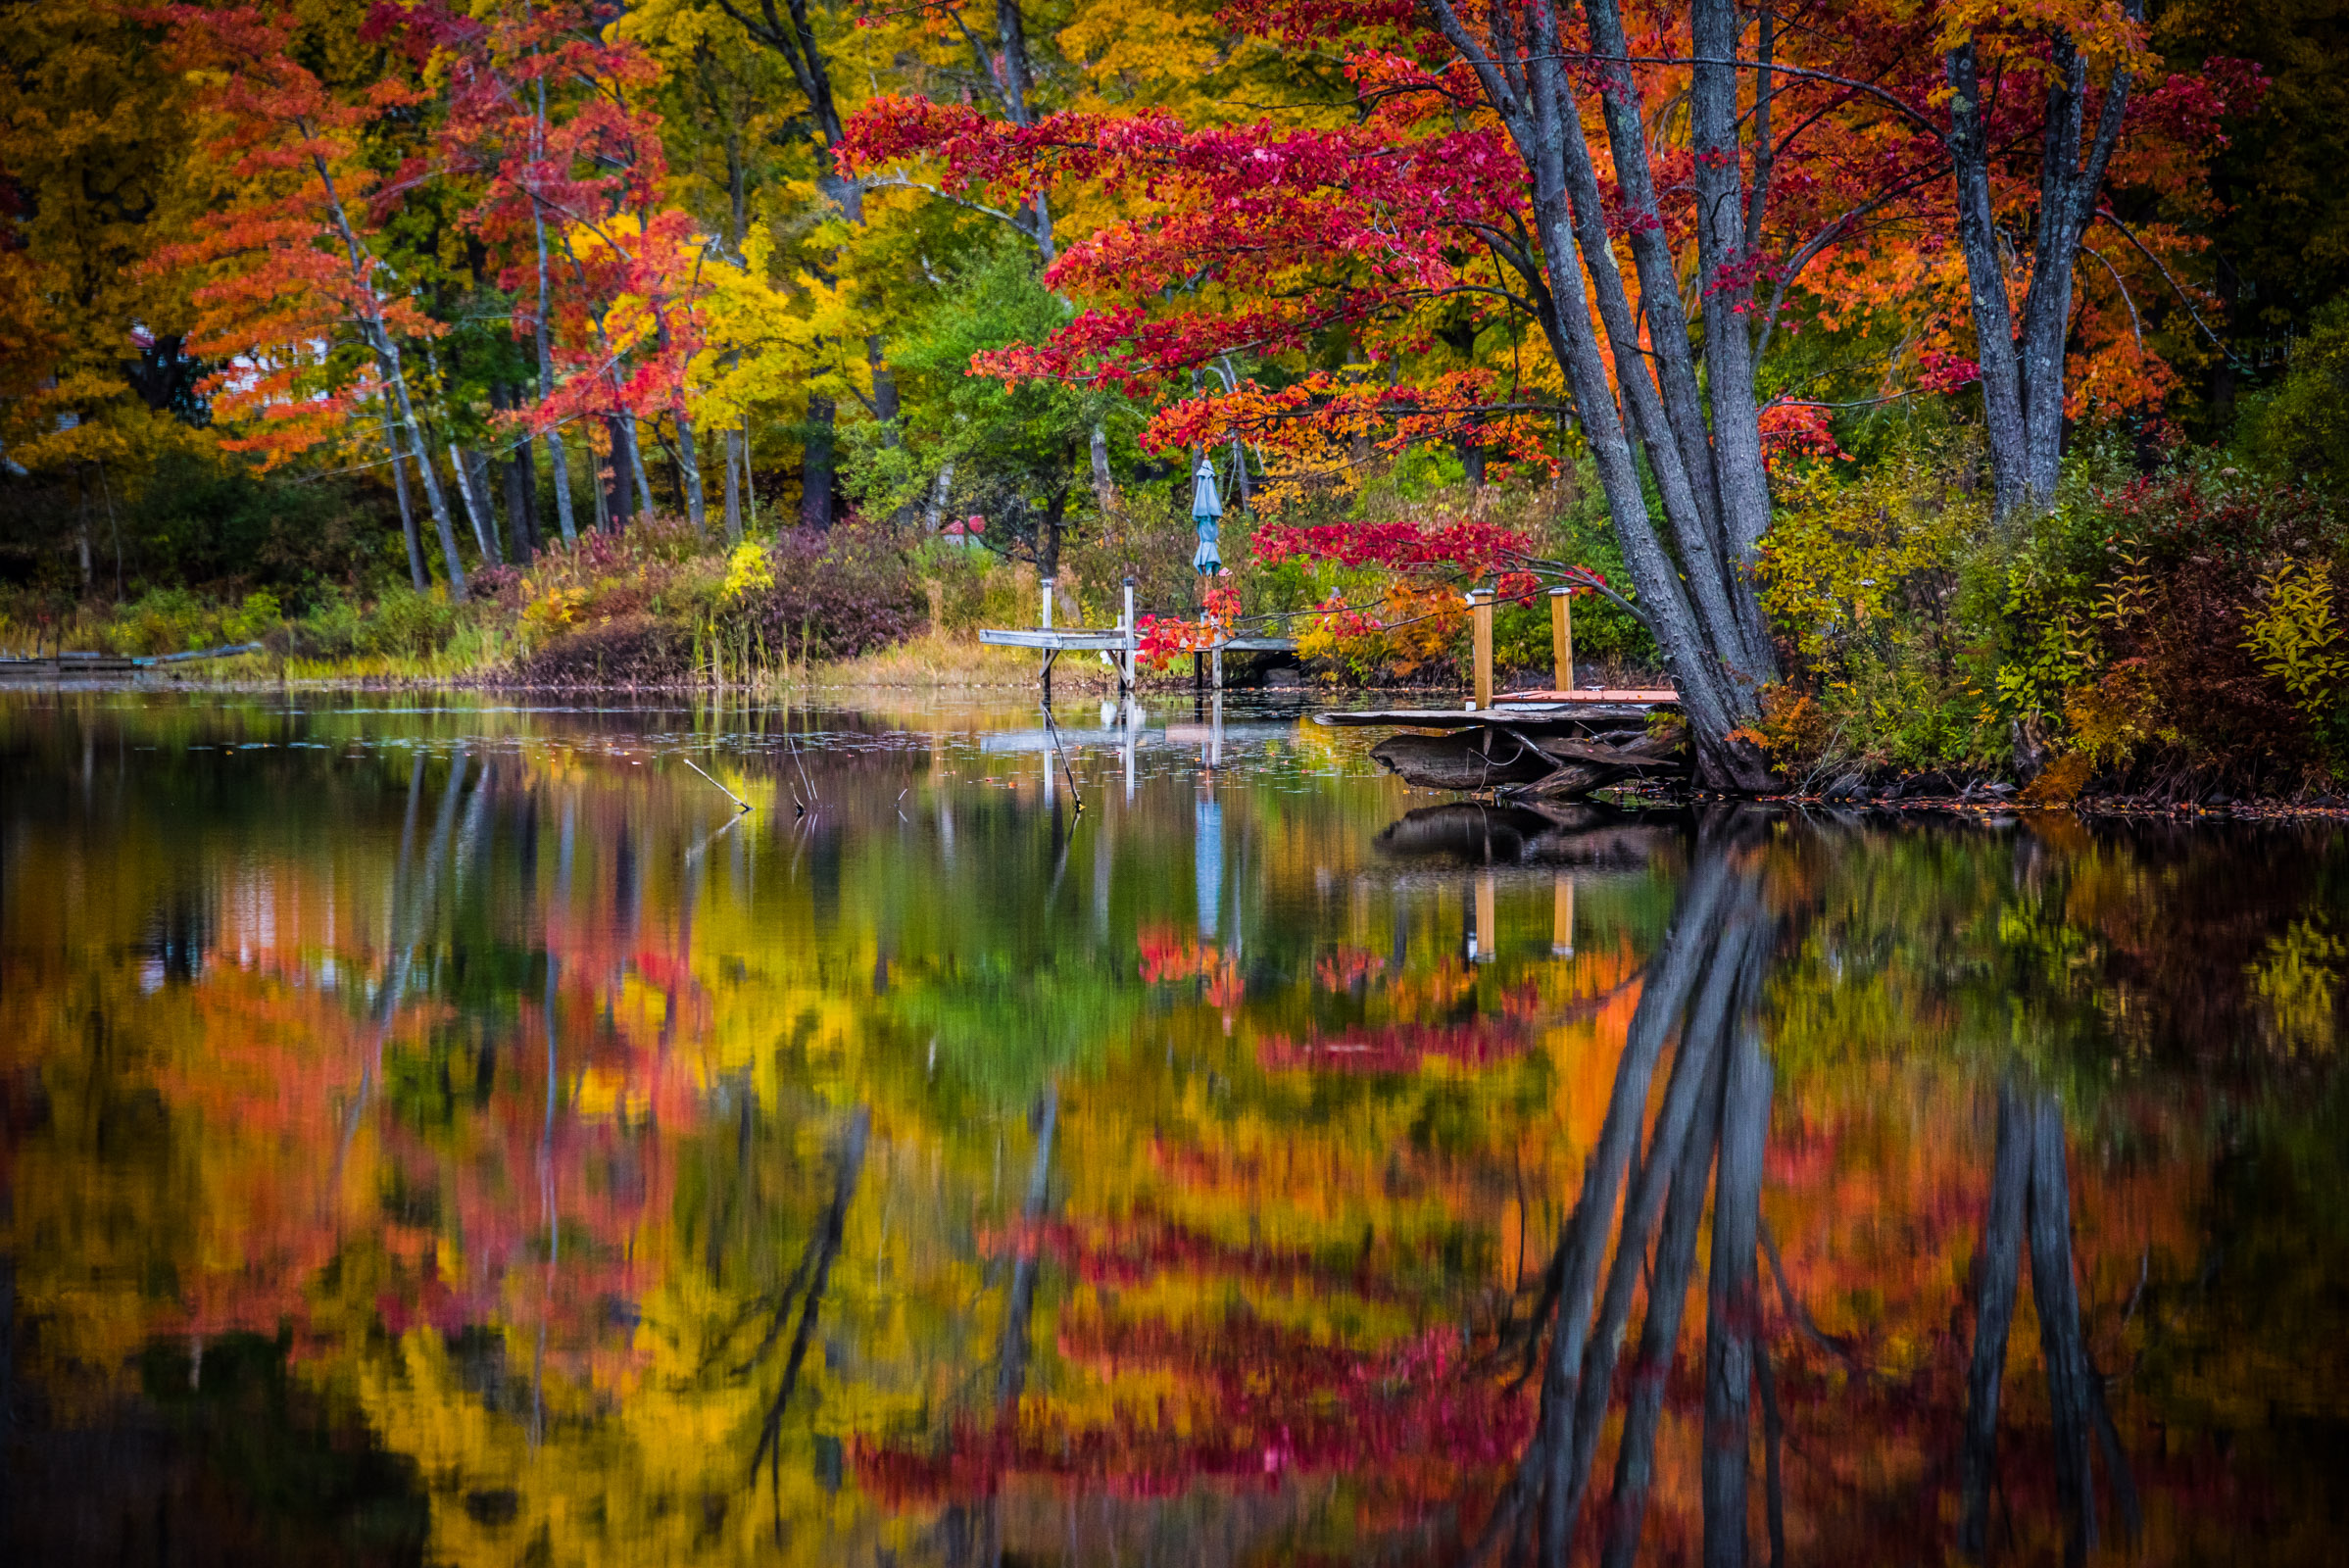 vermont landscape with colorful fall foliage reflecting in a lake, photographed by jamie bannon photography.